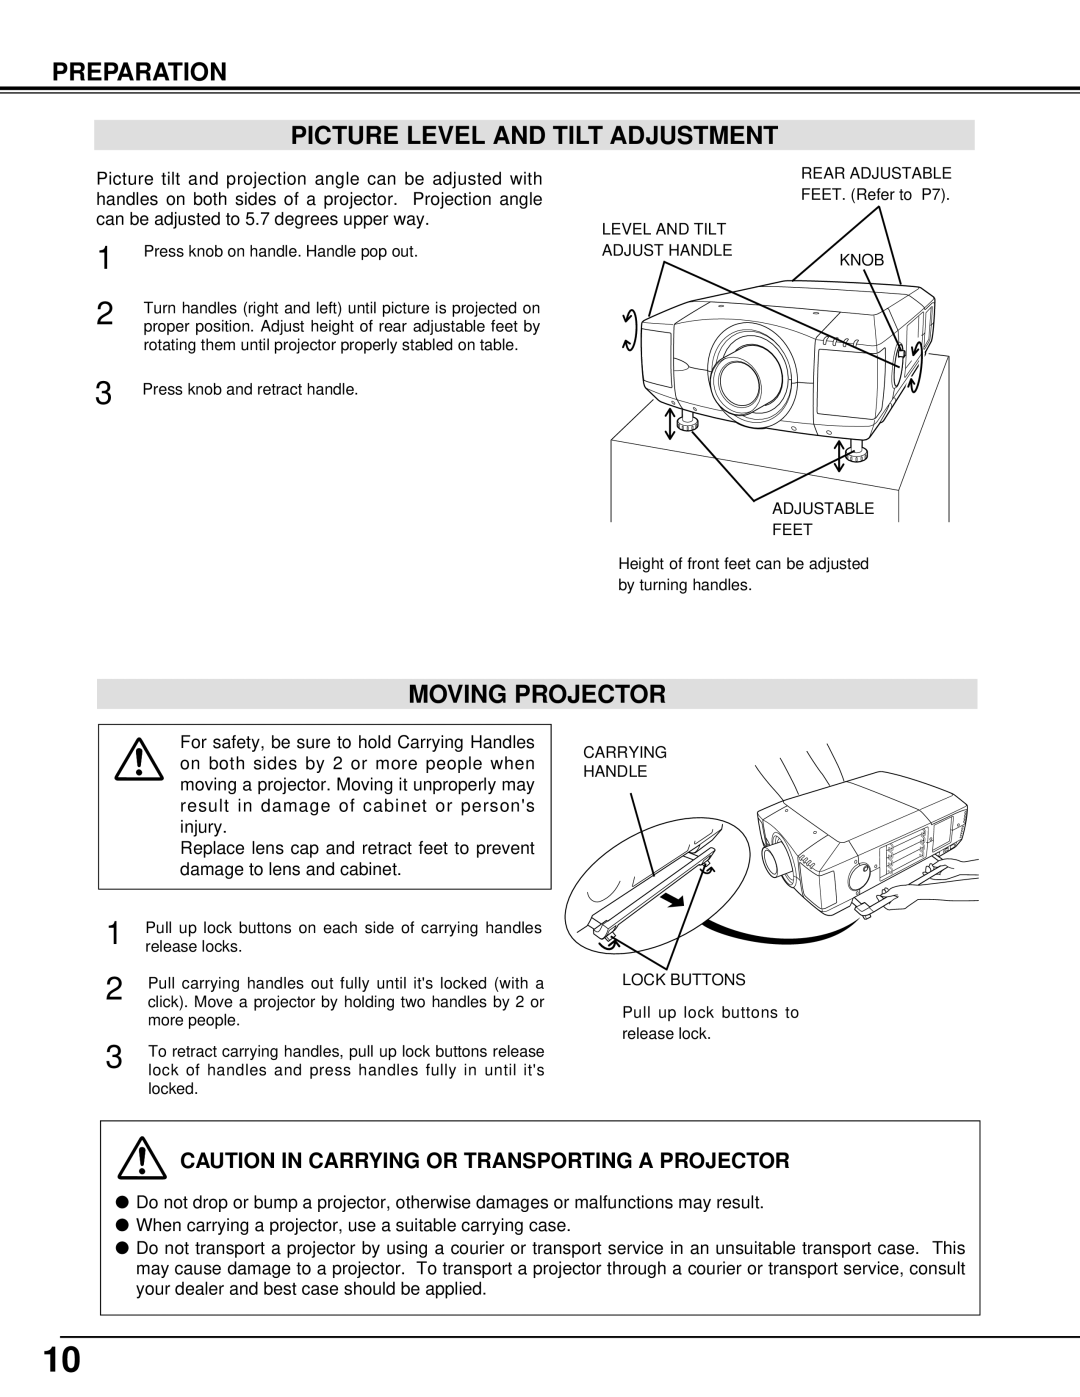 Eiki LC-XT3 instruction manual Preparation Picture Level and Tilt Adjustment, Moving Projector 